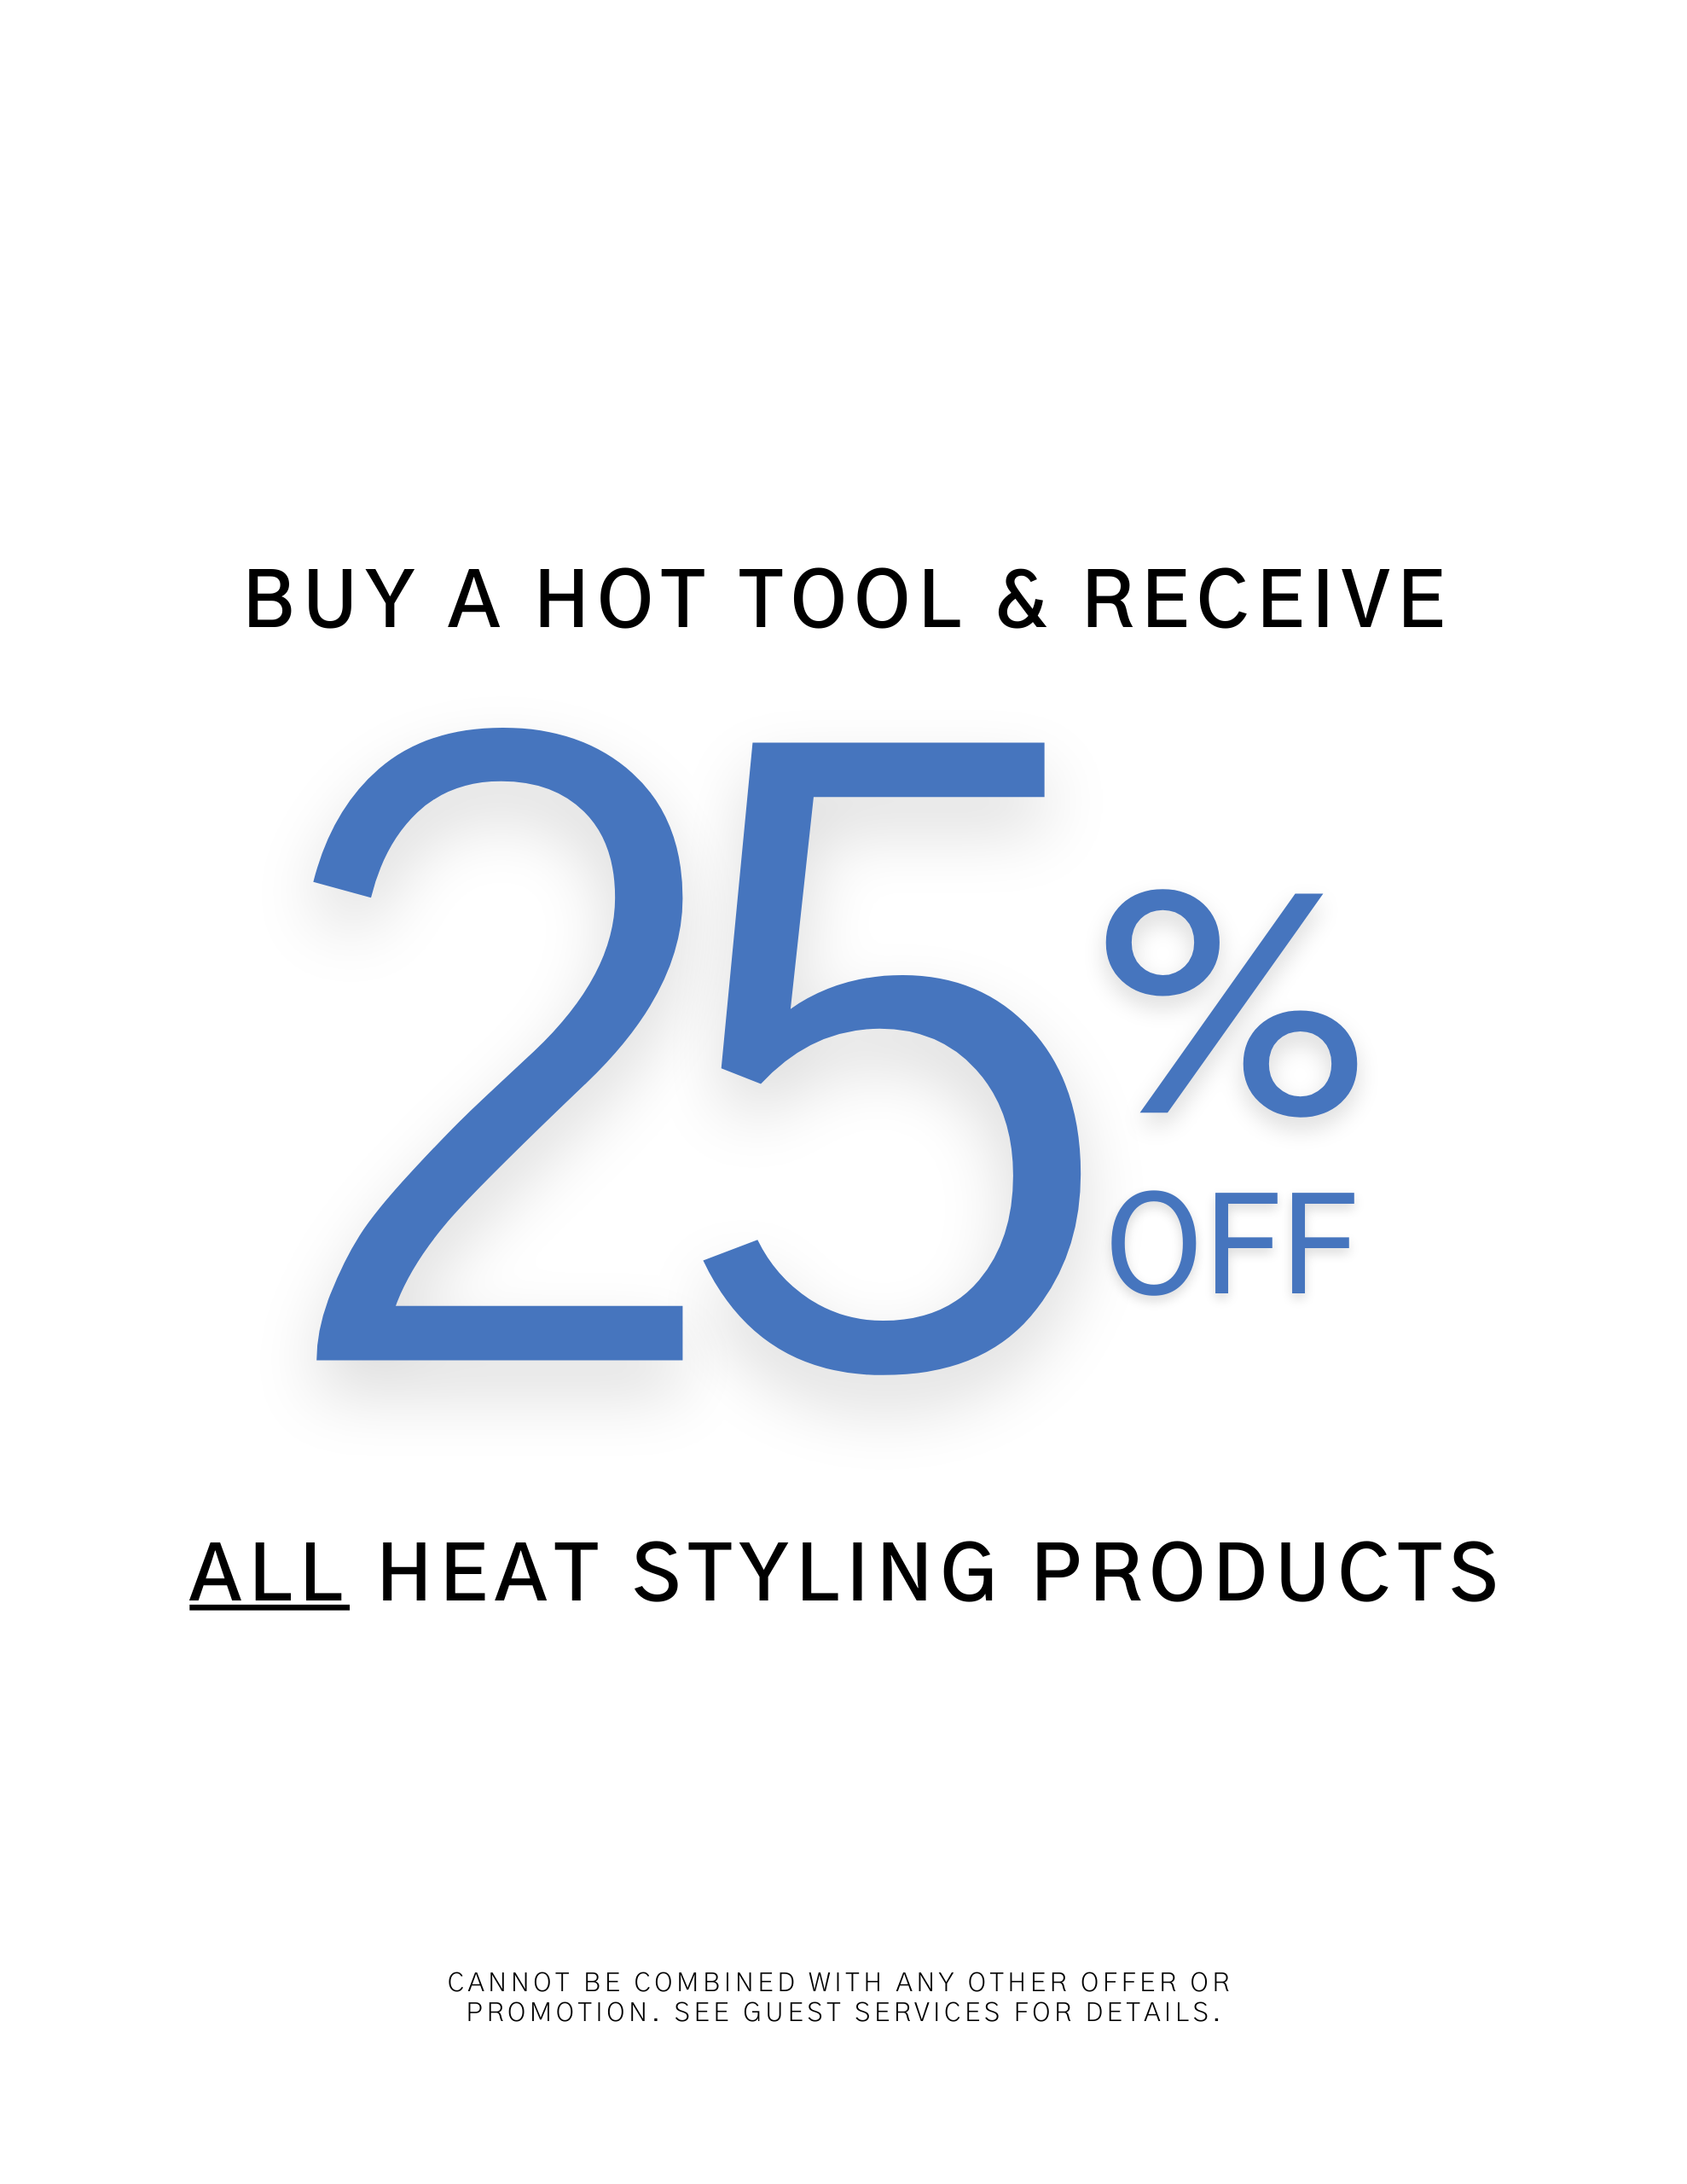 Buy a Hot Tool and Receive 25% off All Heat Styling